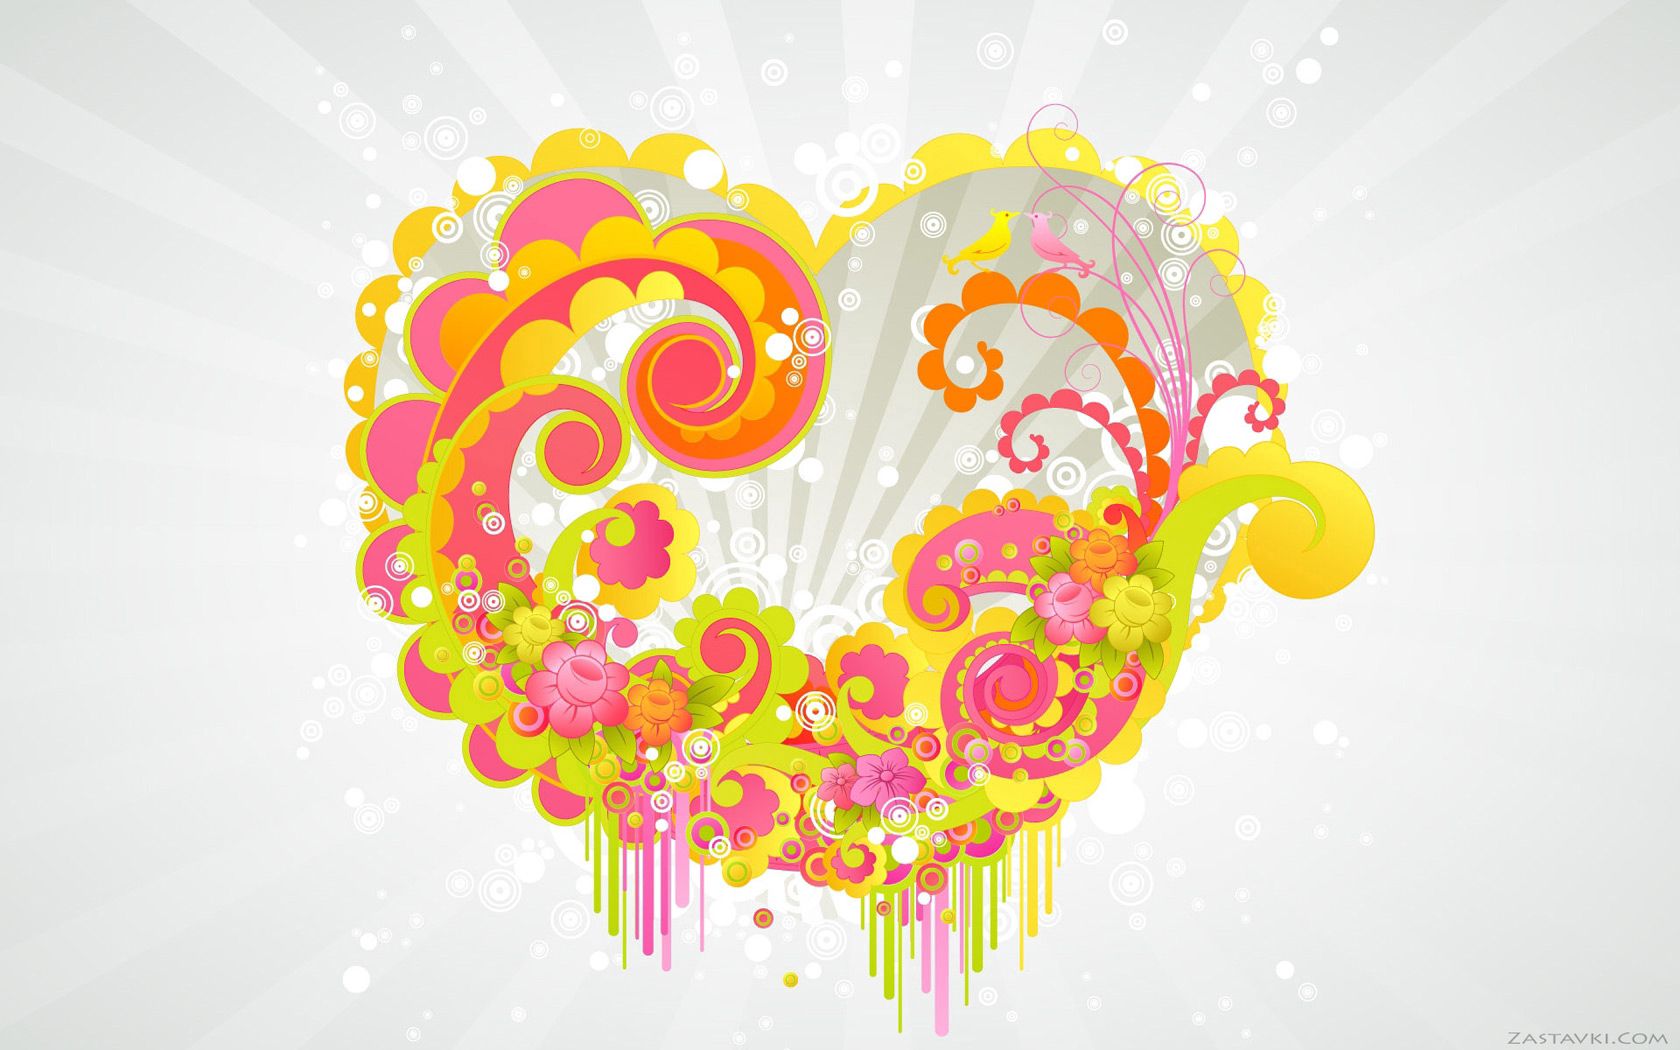 62139 free wallpaper 320x480 for phone, download images colorful, heart, love, color 320x480 for mobile